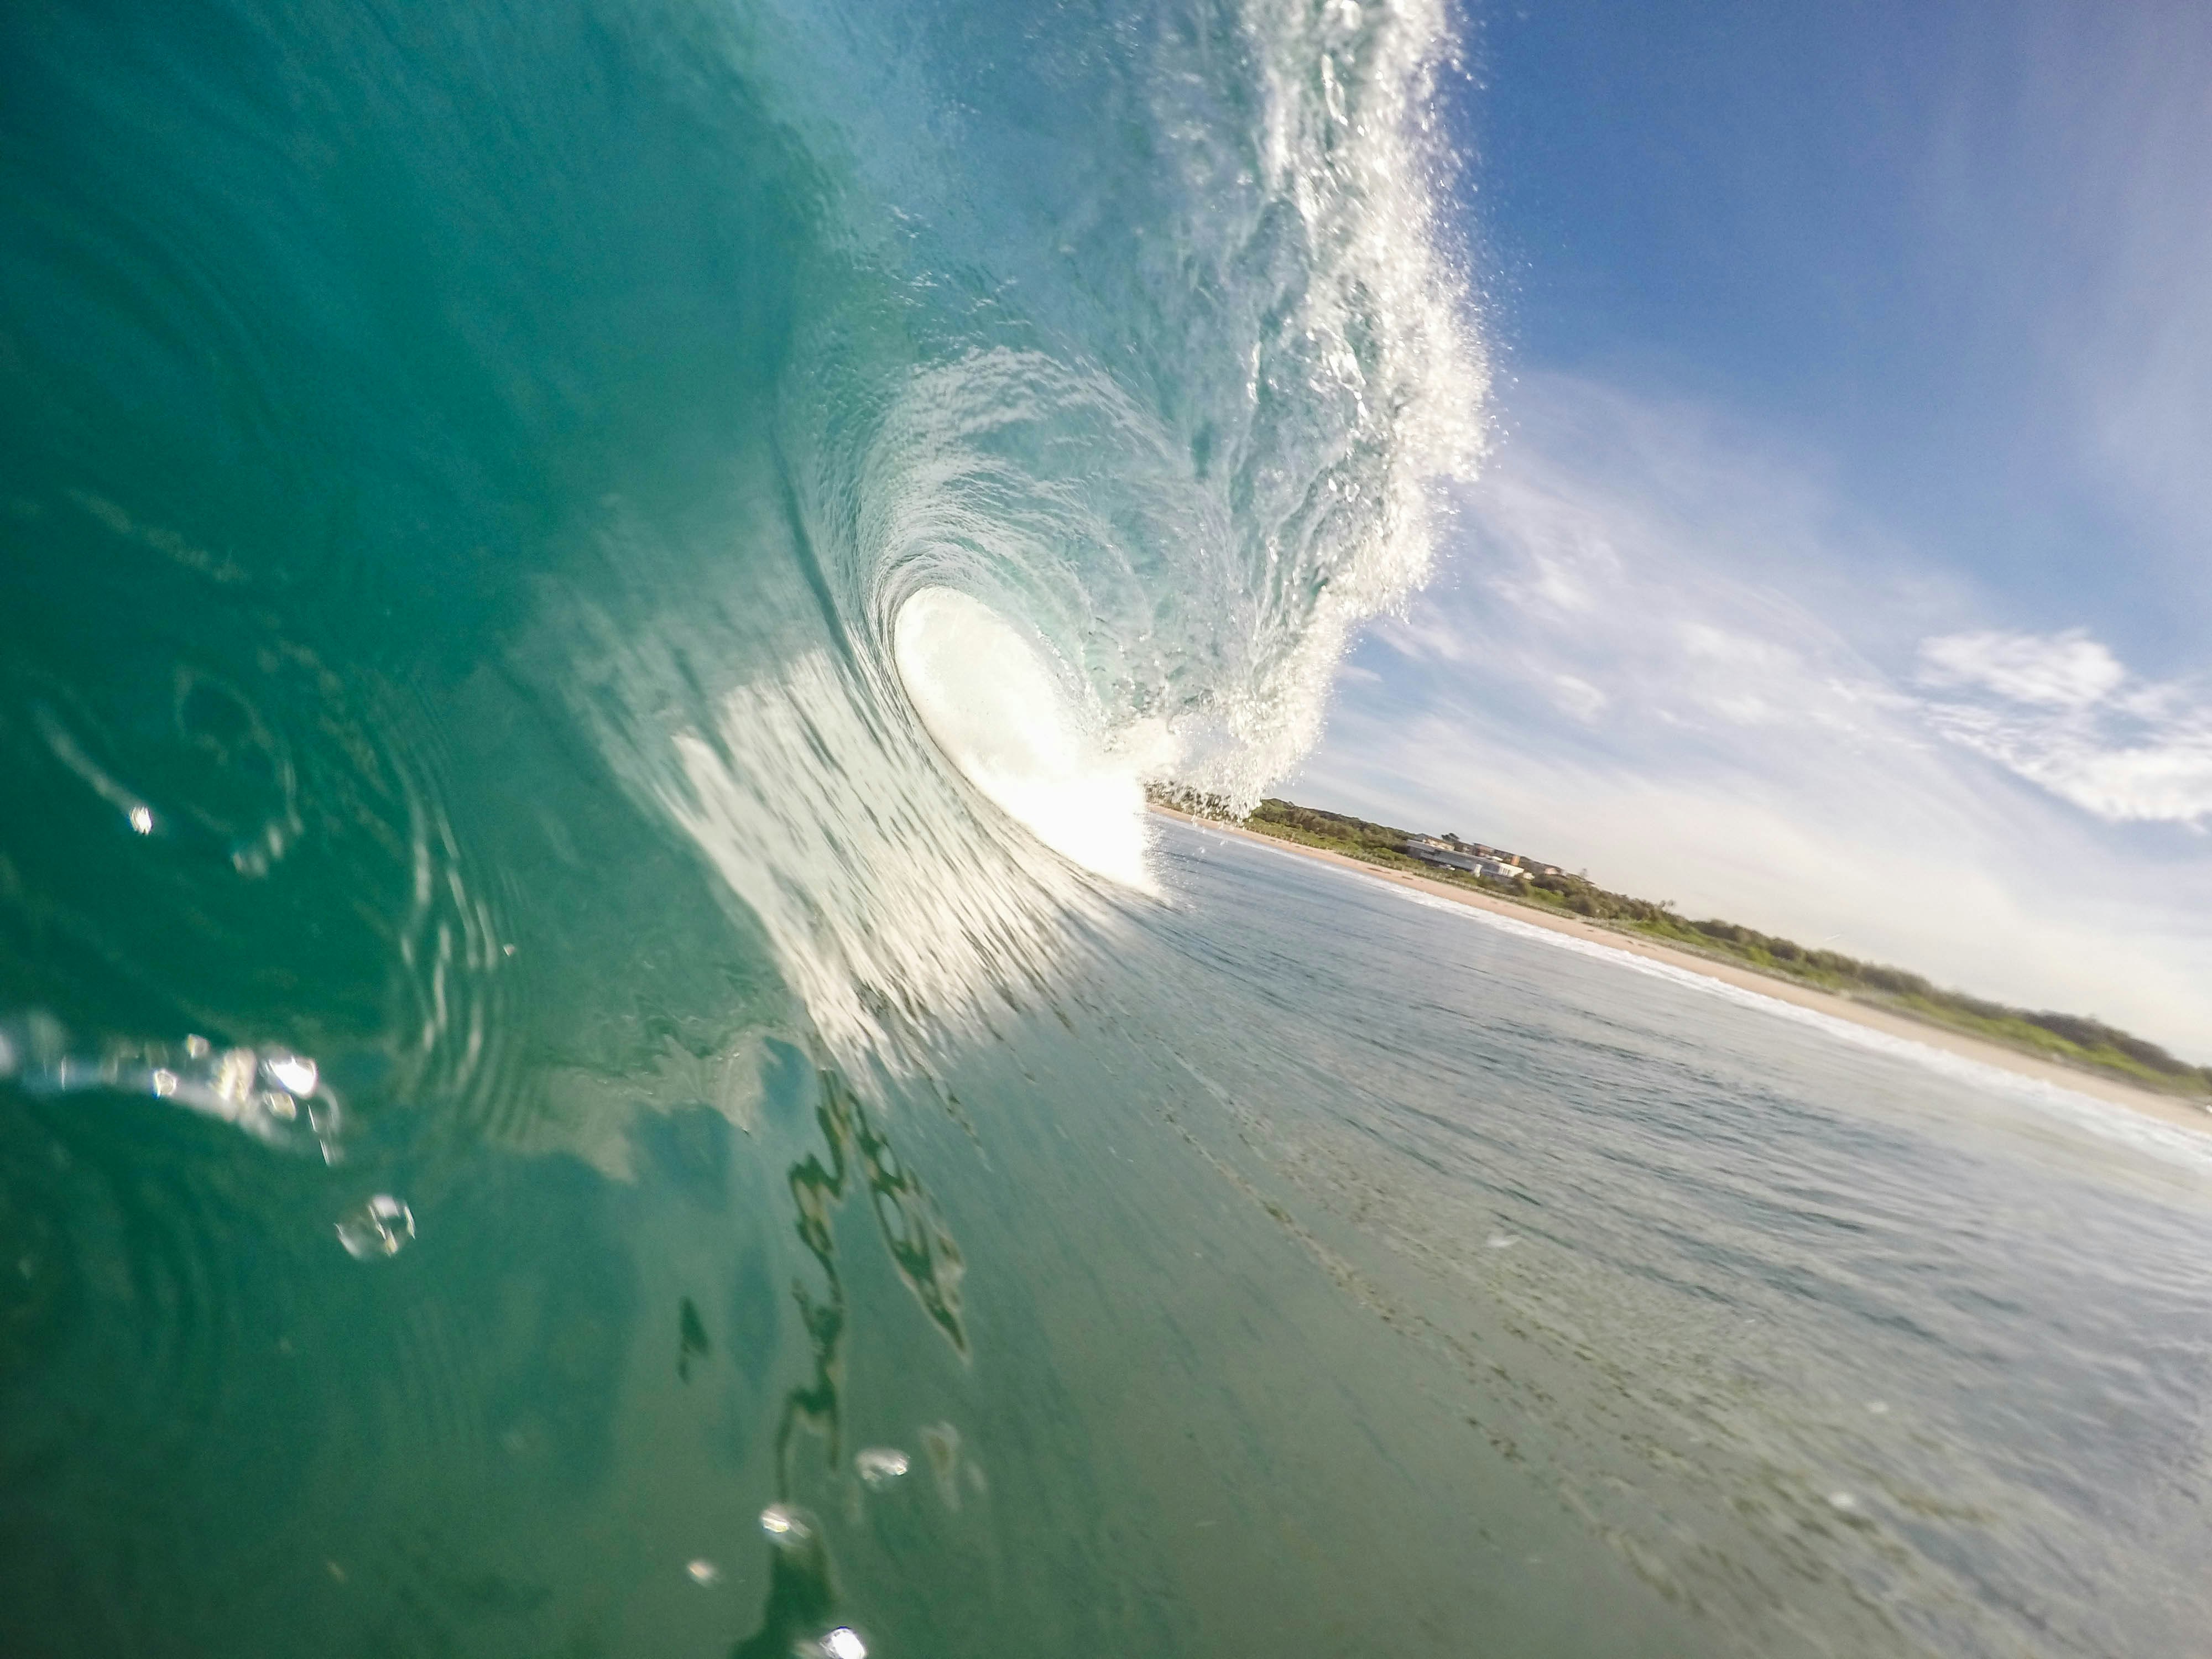 A close up view of a clear wave.